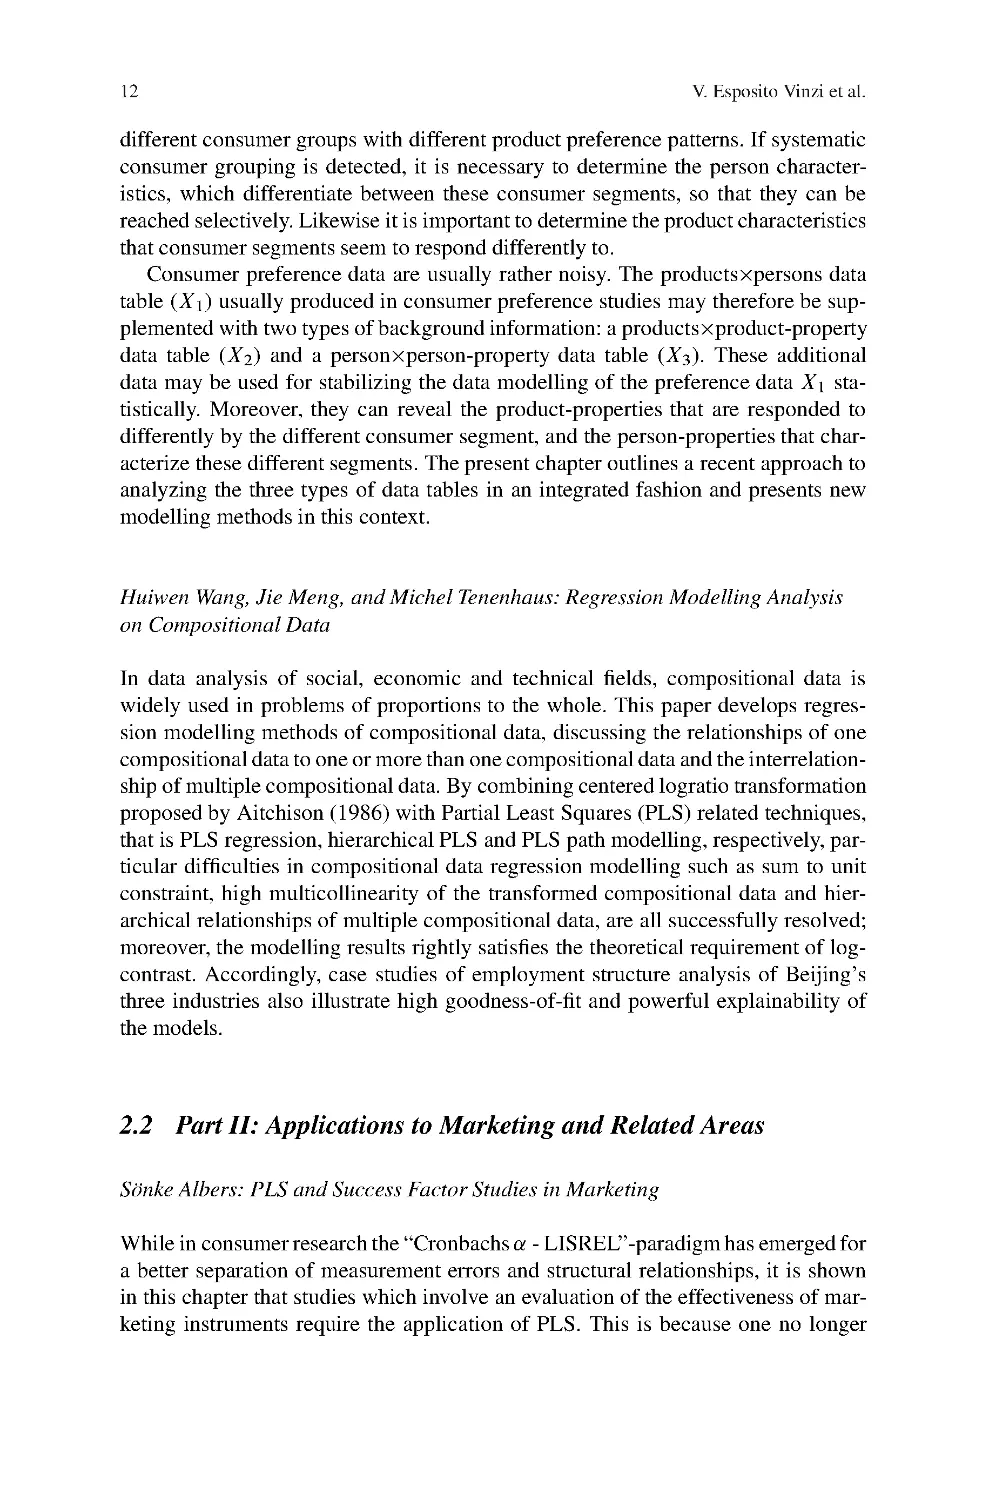 2.2 Part II: Applications to Marketing and Related Areas